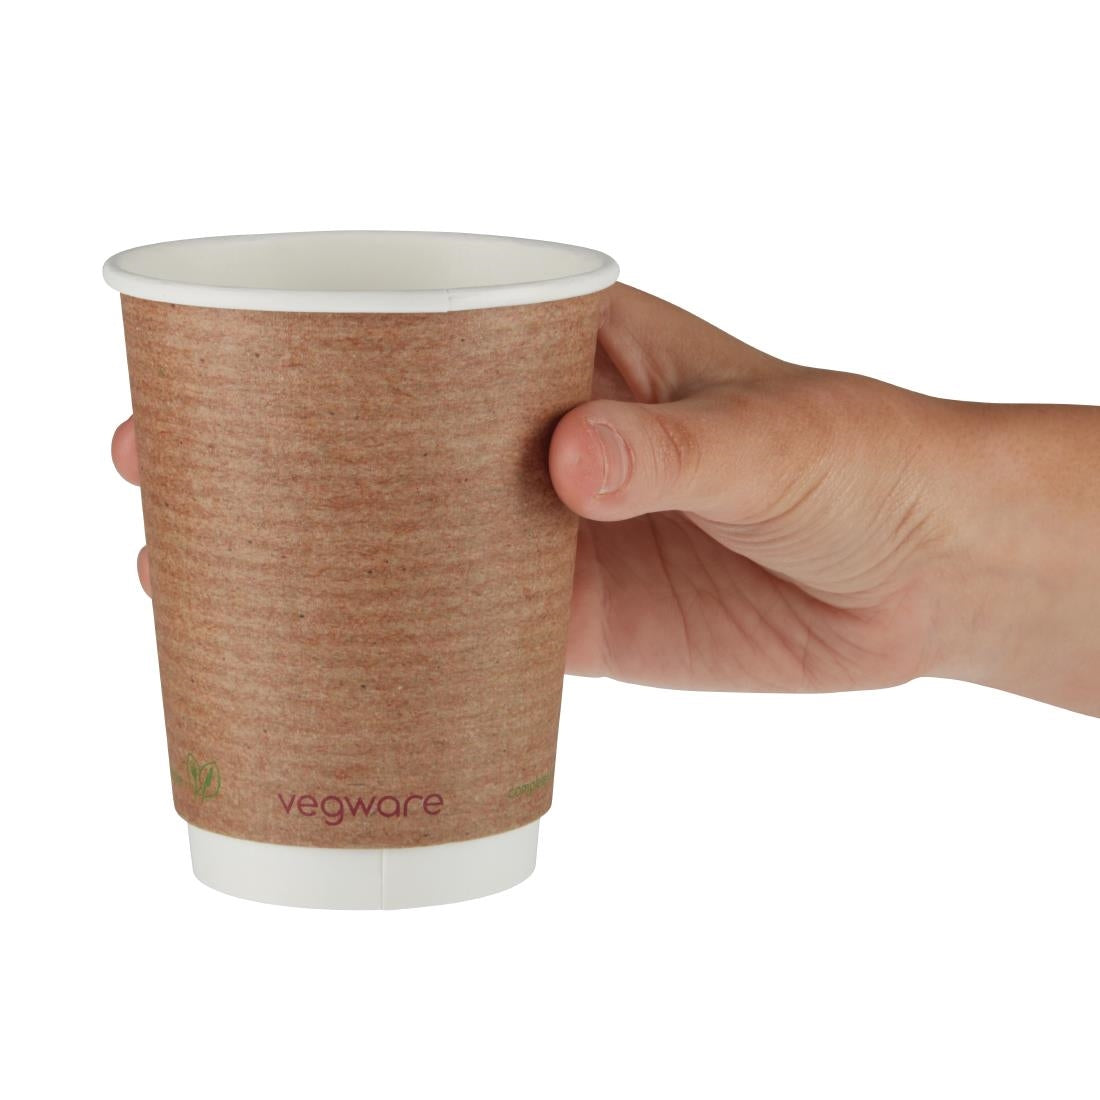 GH021 Vegware Compostable Coffee Cups Double Wall 340ml / 12oz (Pack of 500)